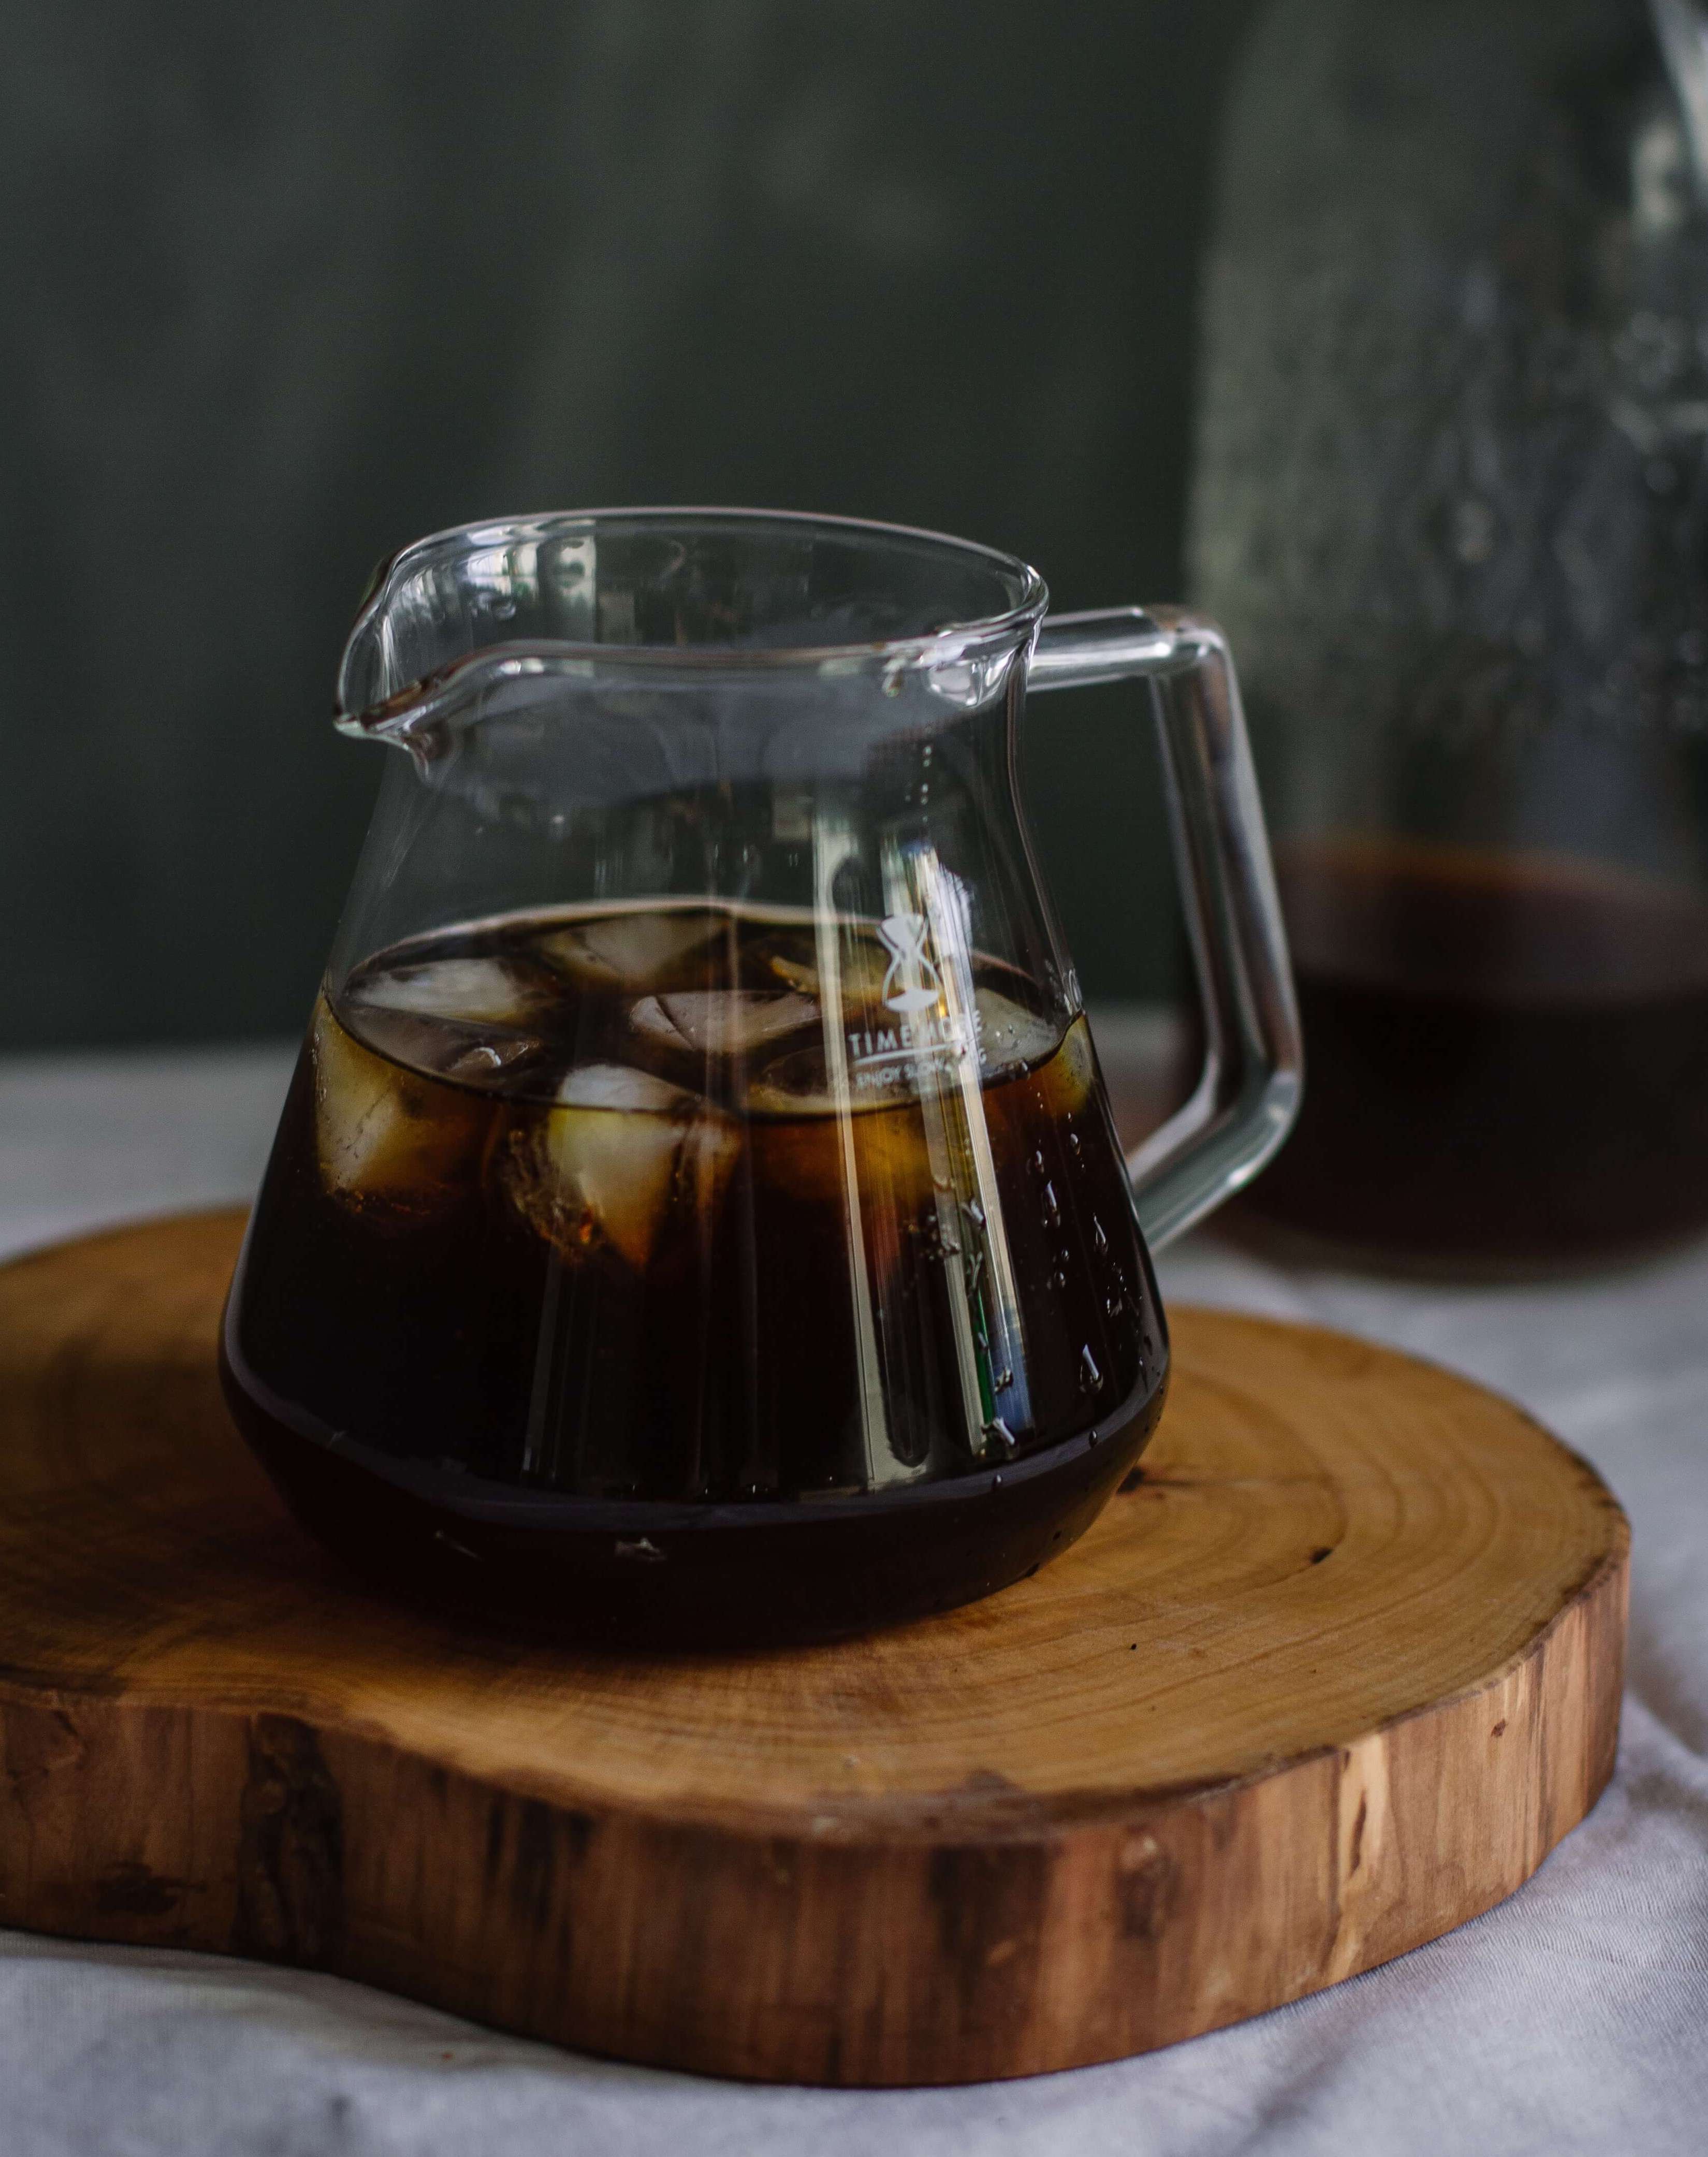 Cold Brew Coffee 101: What It Is, Why It’s Better, and How to Make It - Mosi Tea